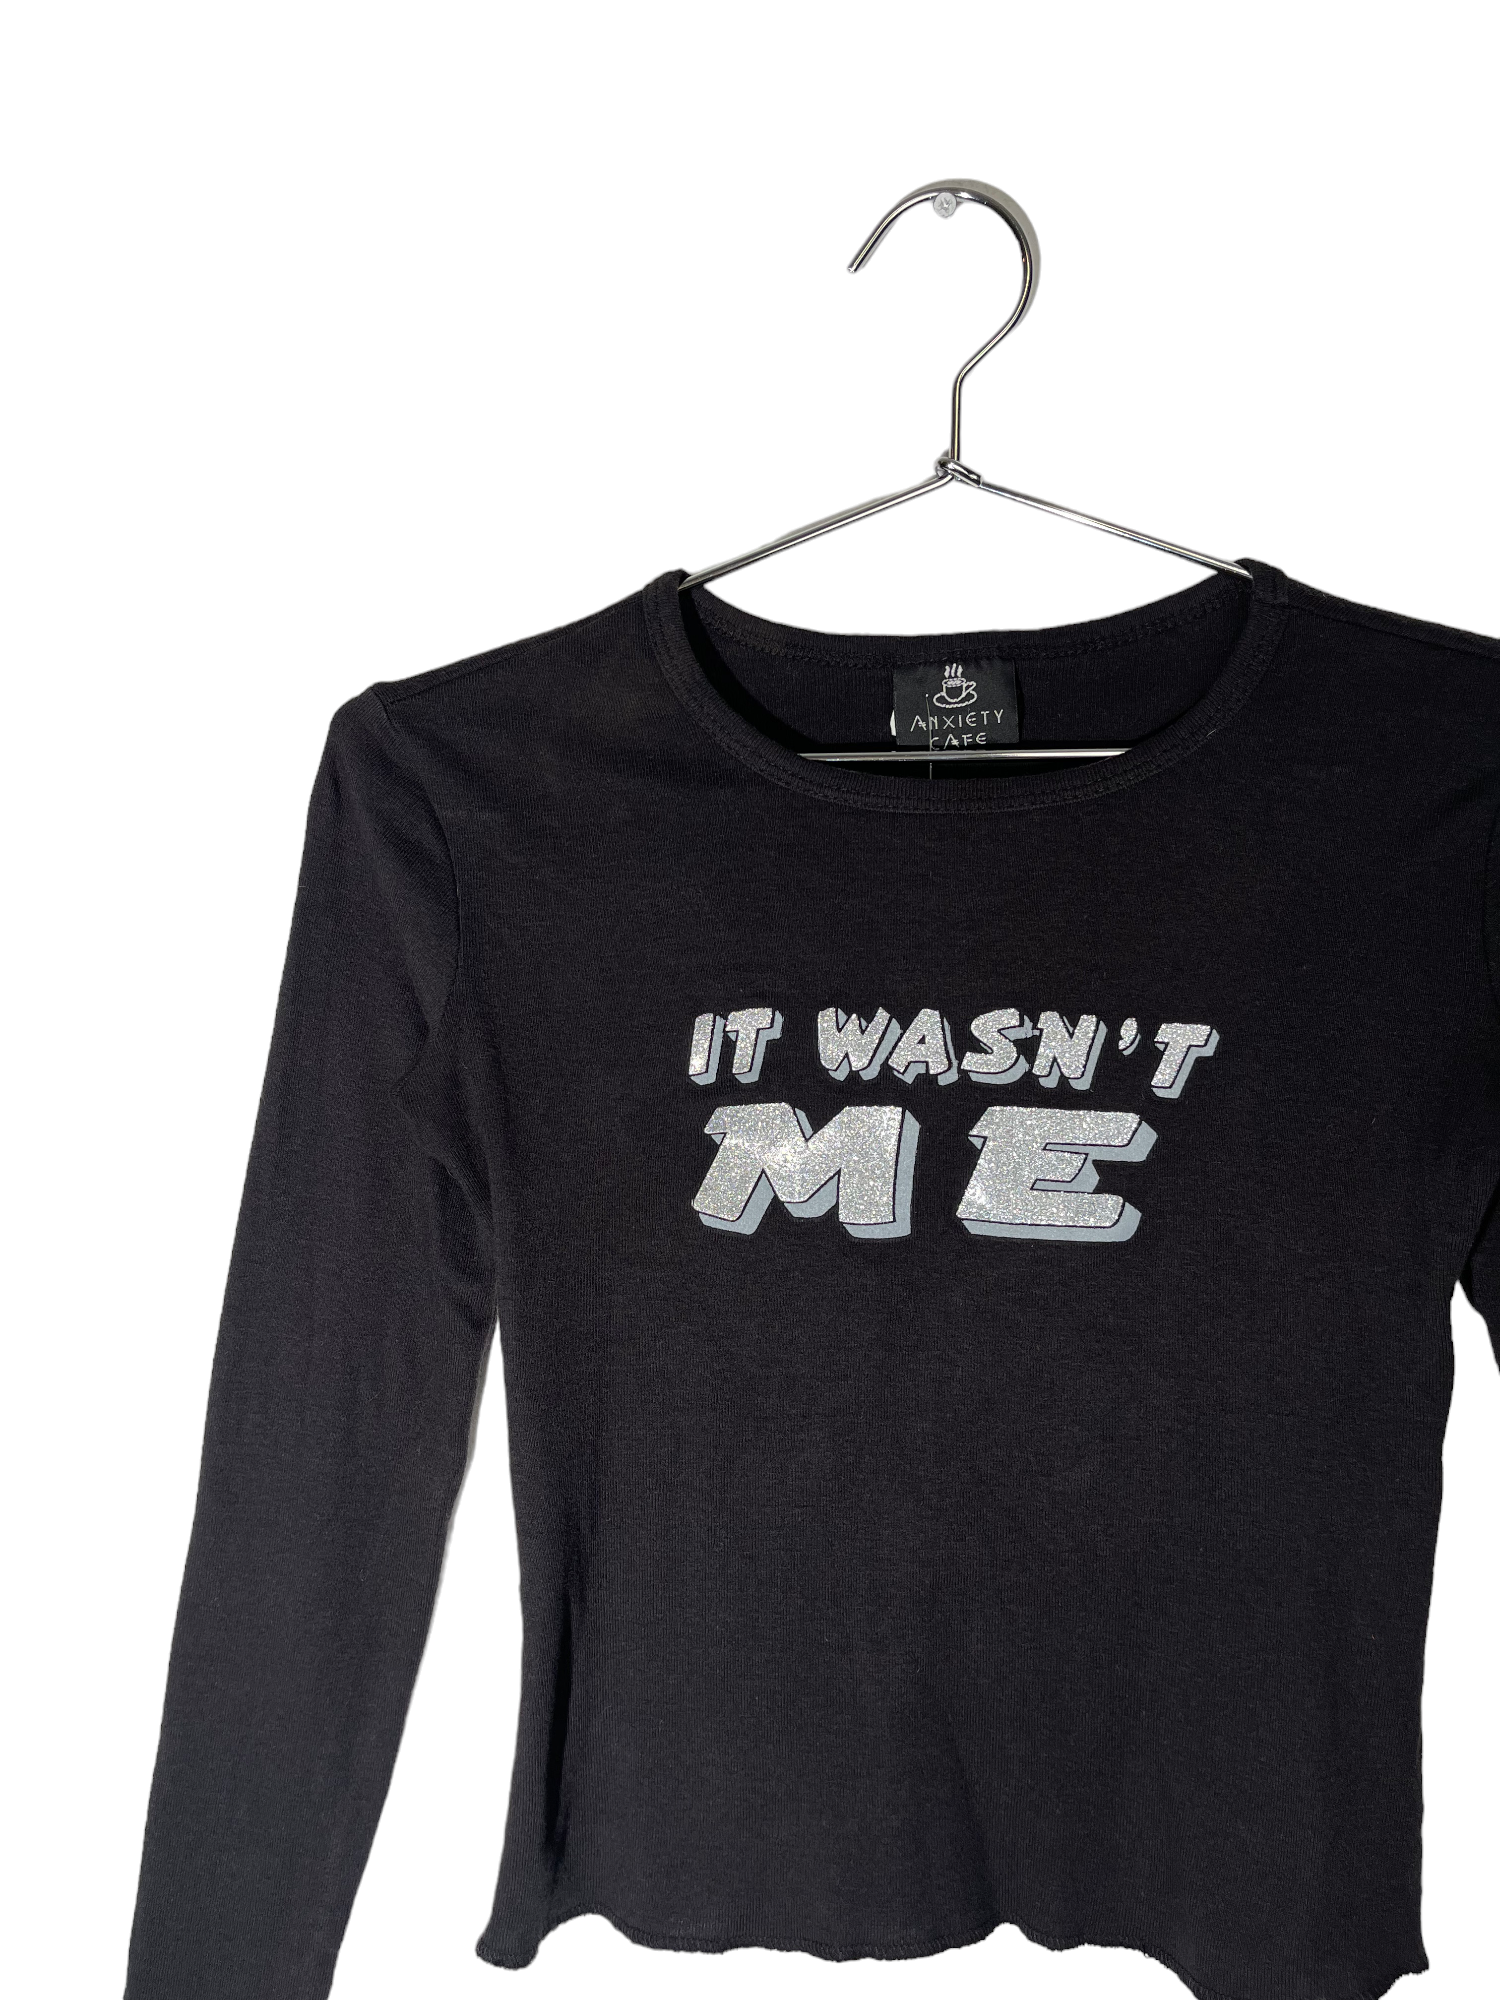 "It Wasn't Me" Graphic Long Sleeve Top